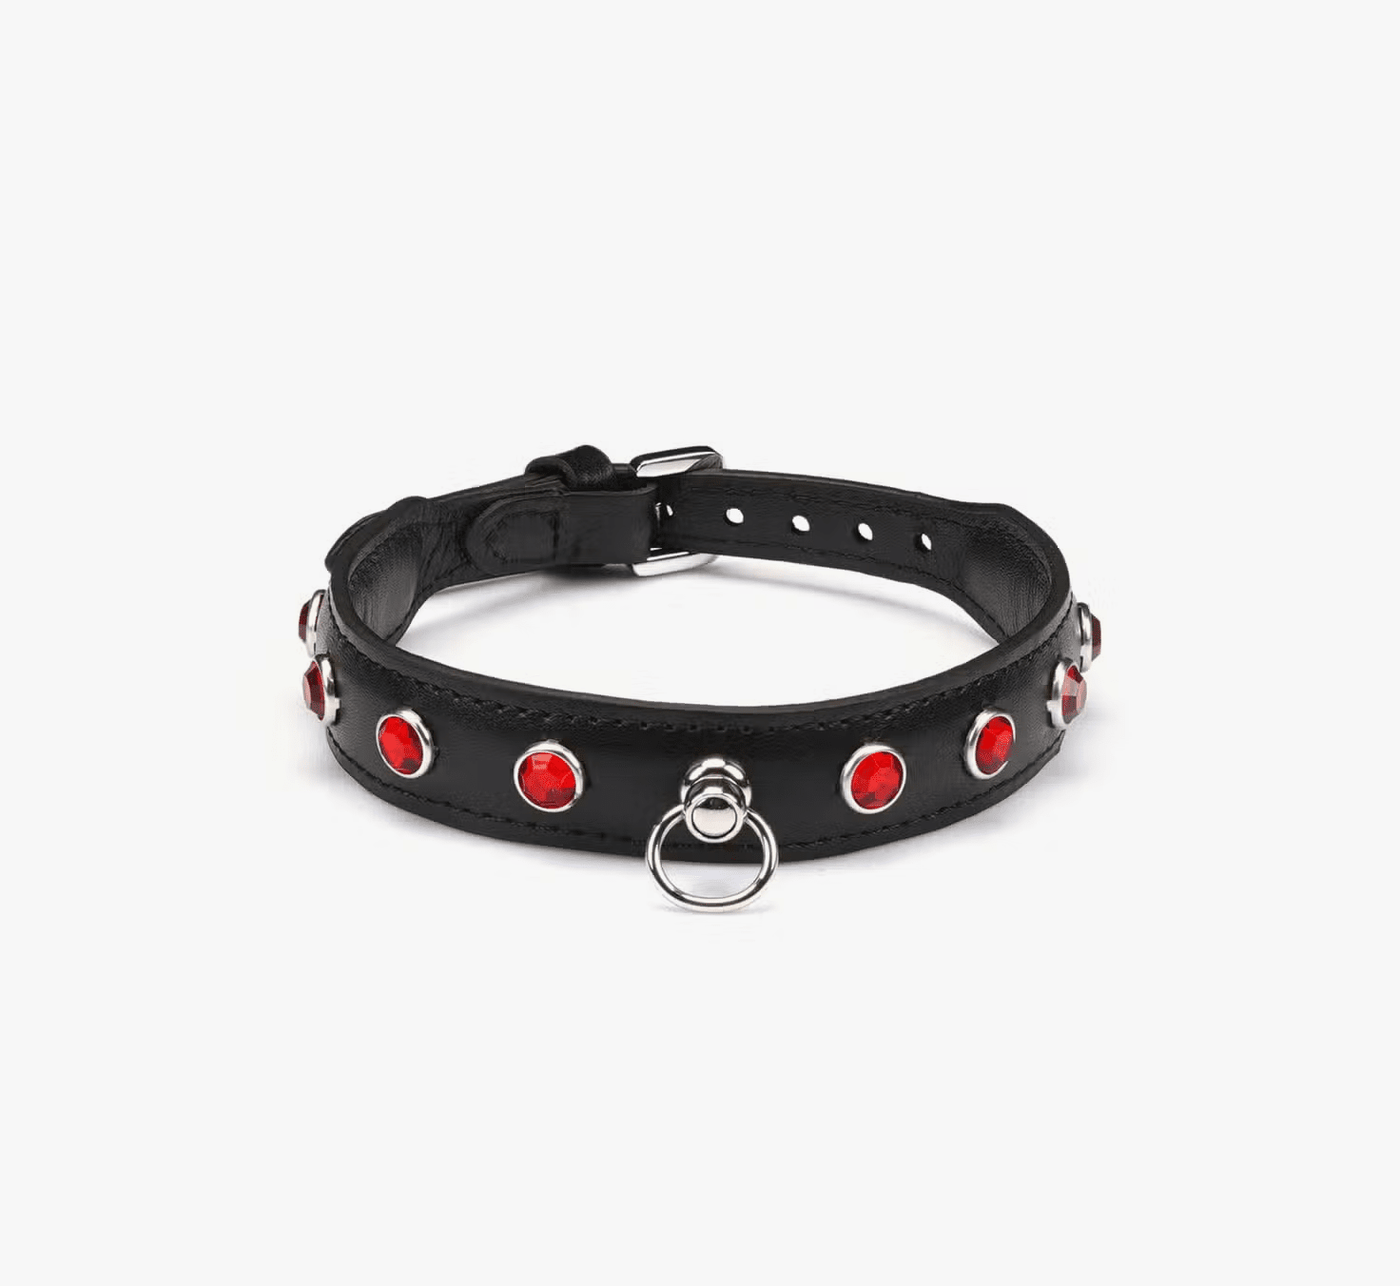 Premium Leather Choker with Red Gems by Liebe Seele - Hamilton Park Electronics